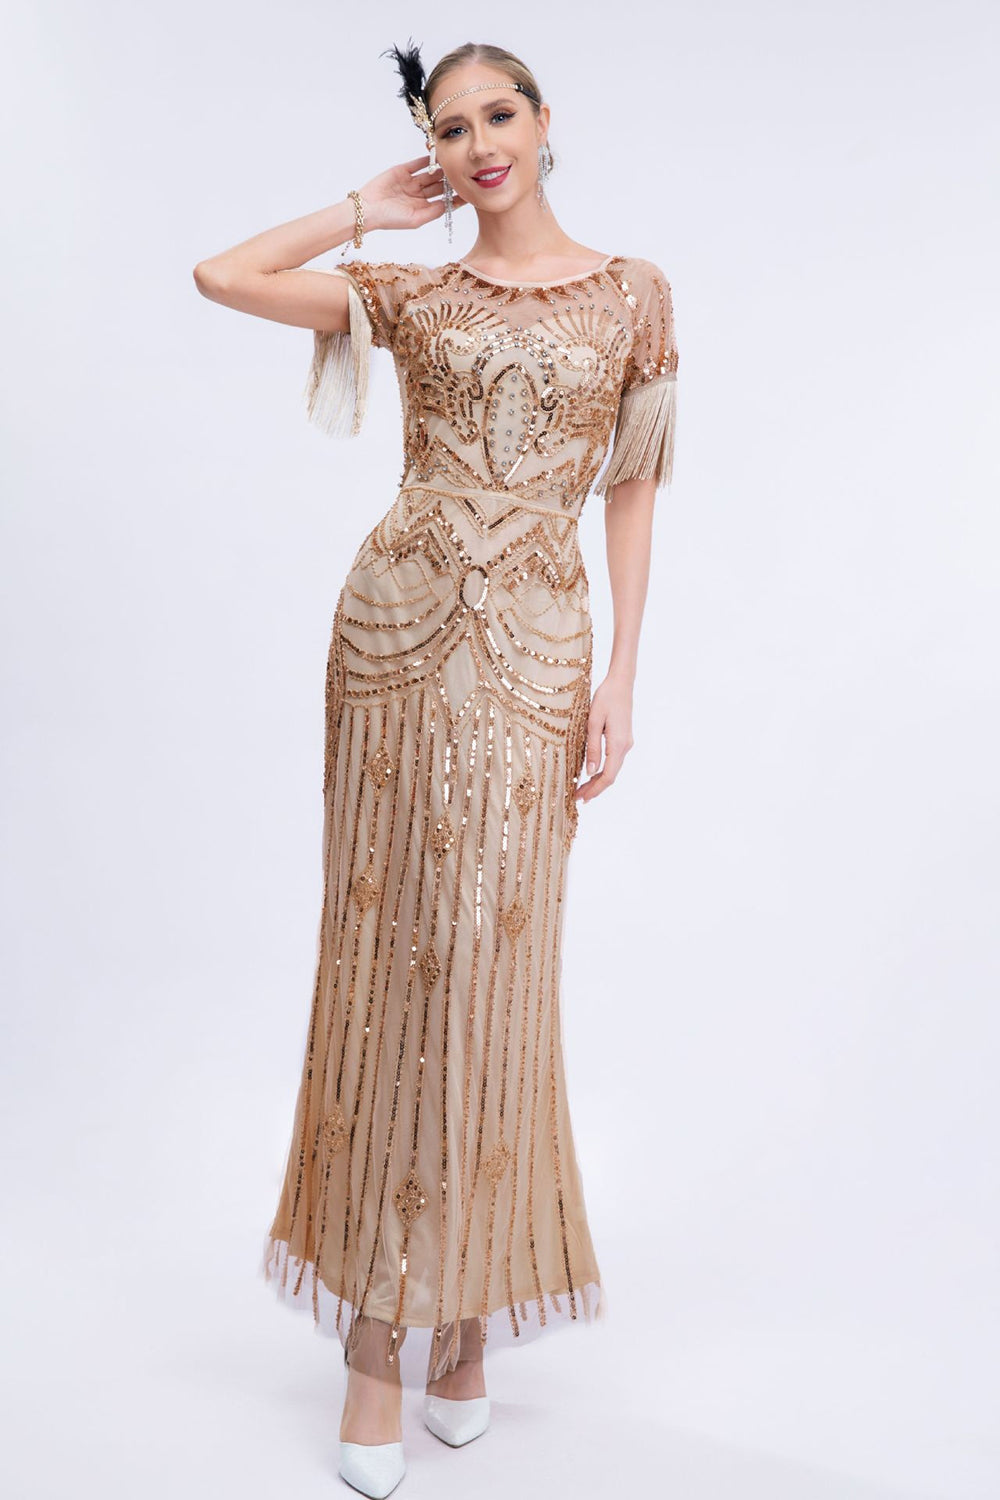 Bling Round Neck Champagne Fringes Long 1920s Dress with Short Sleeves